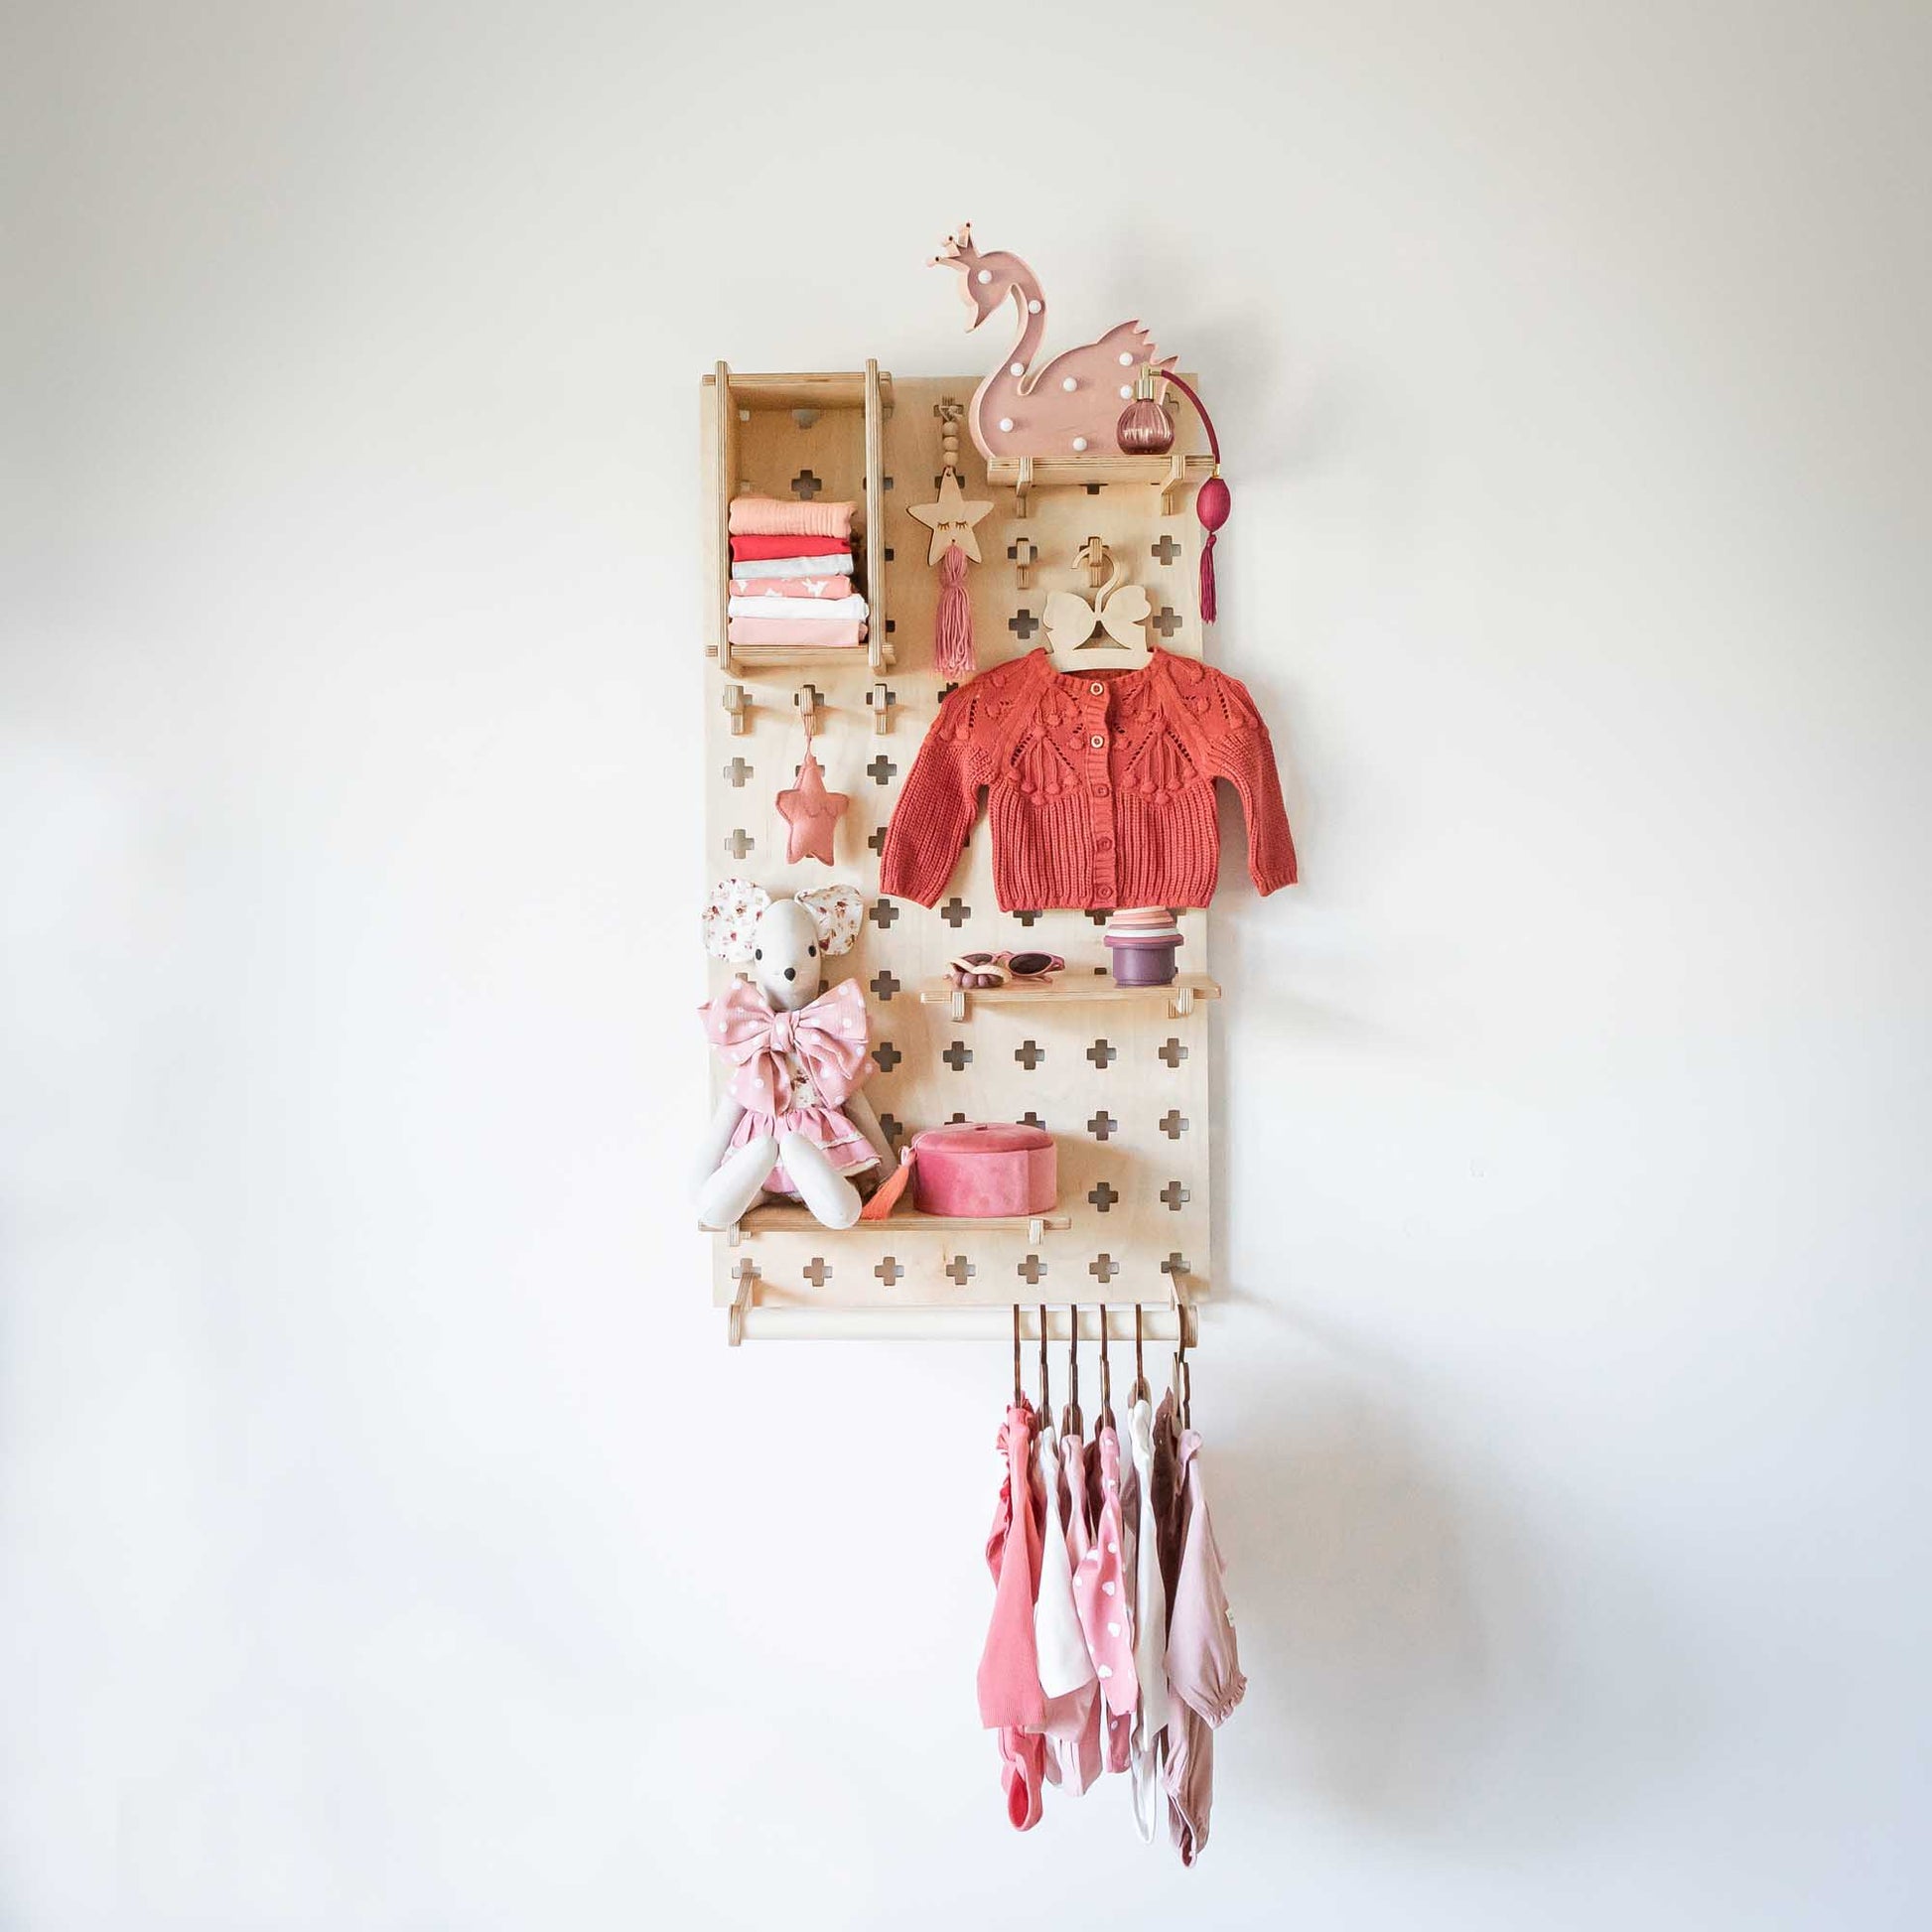 A Sweet HOME from wood Montessori-inspired toddler shelf with clothes and toys hanging on a Pegboard with Clothes Hanger.